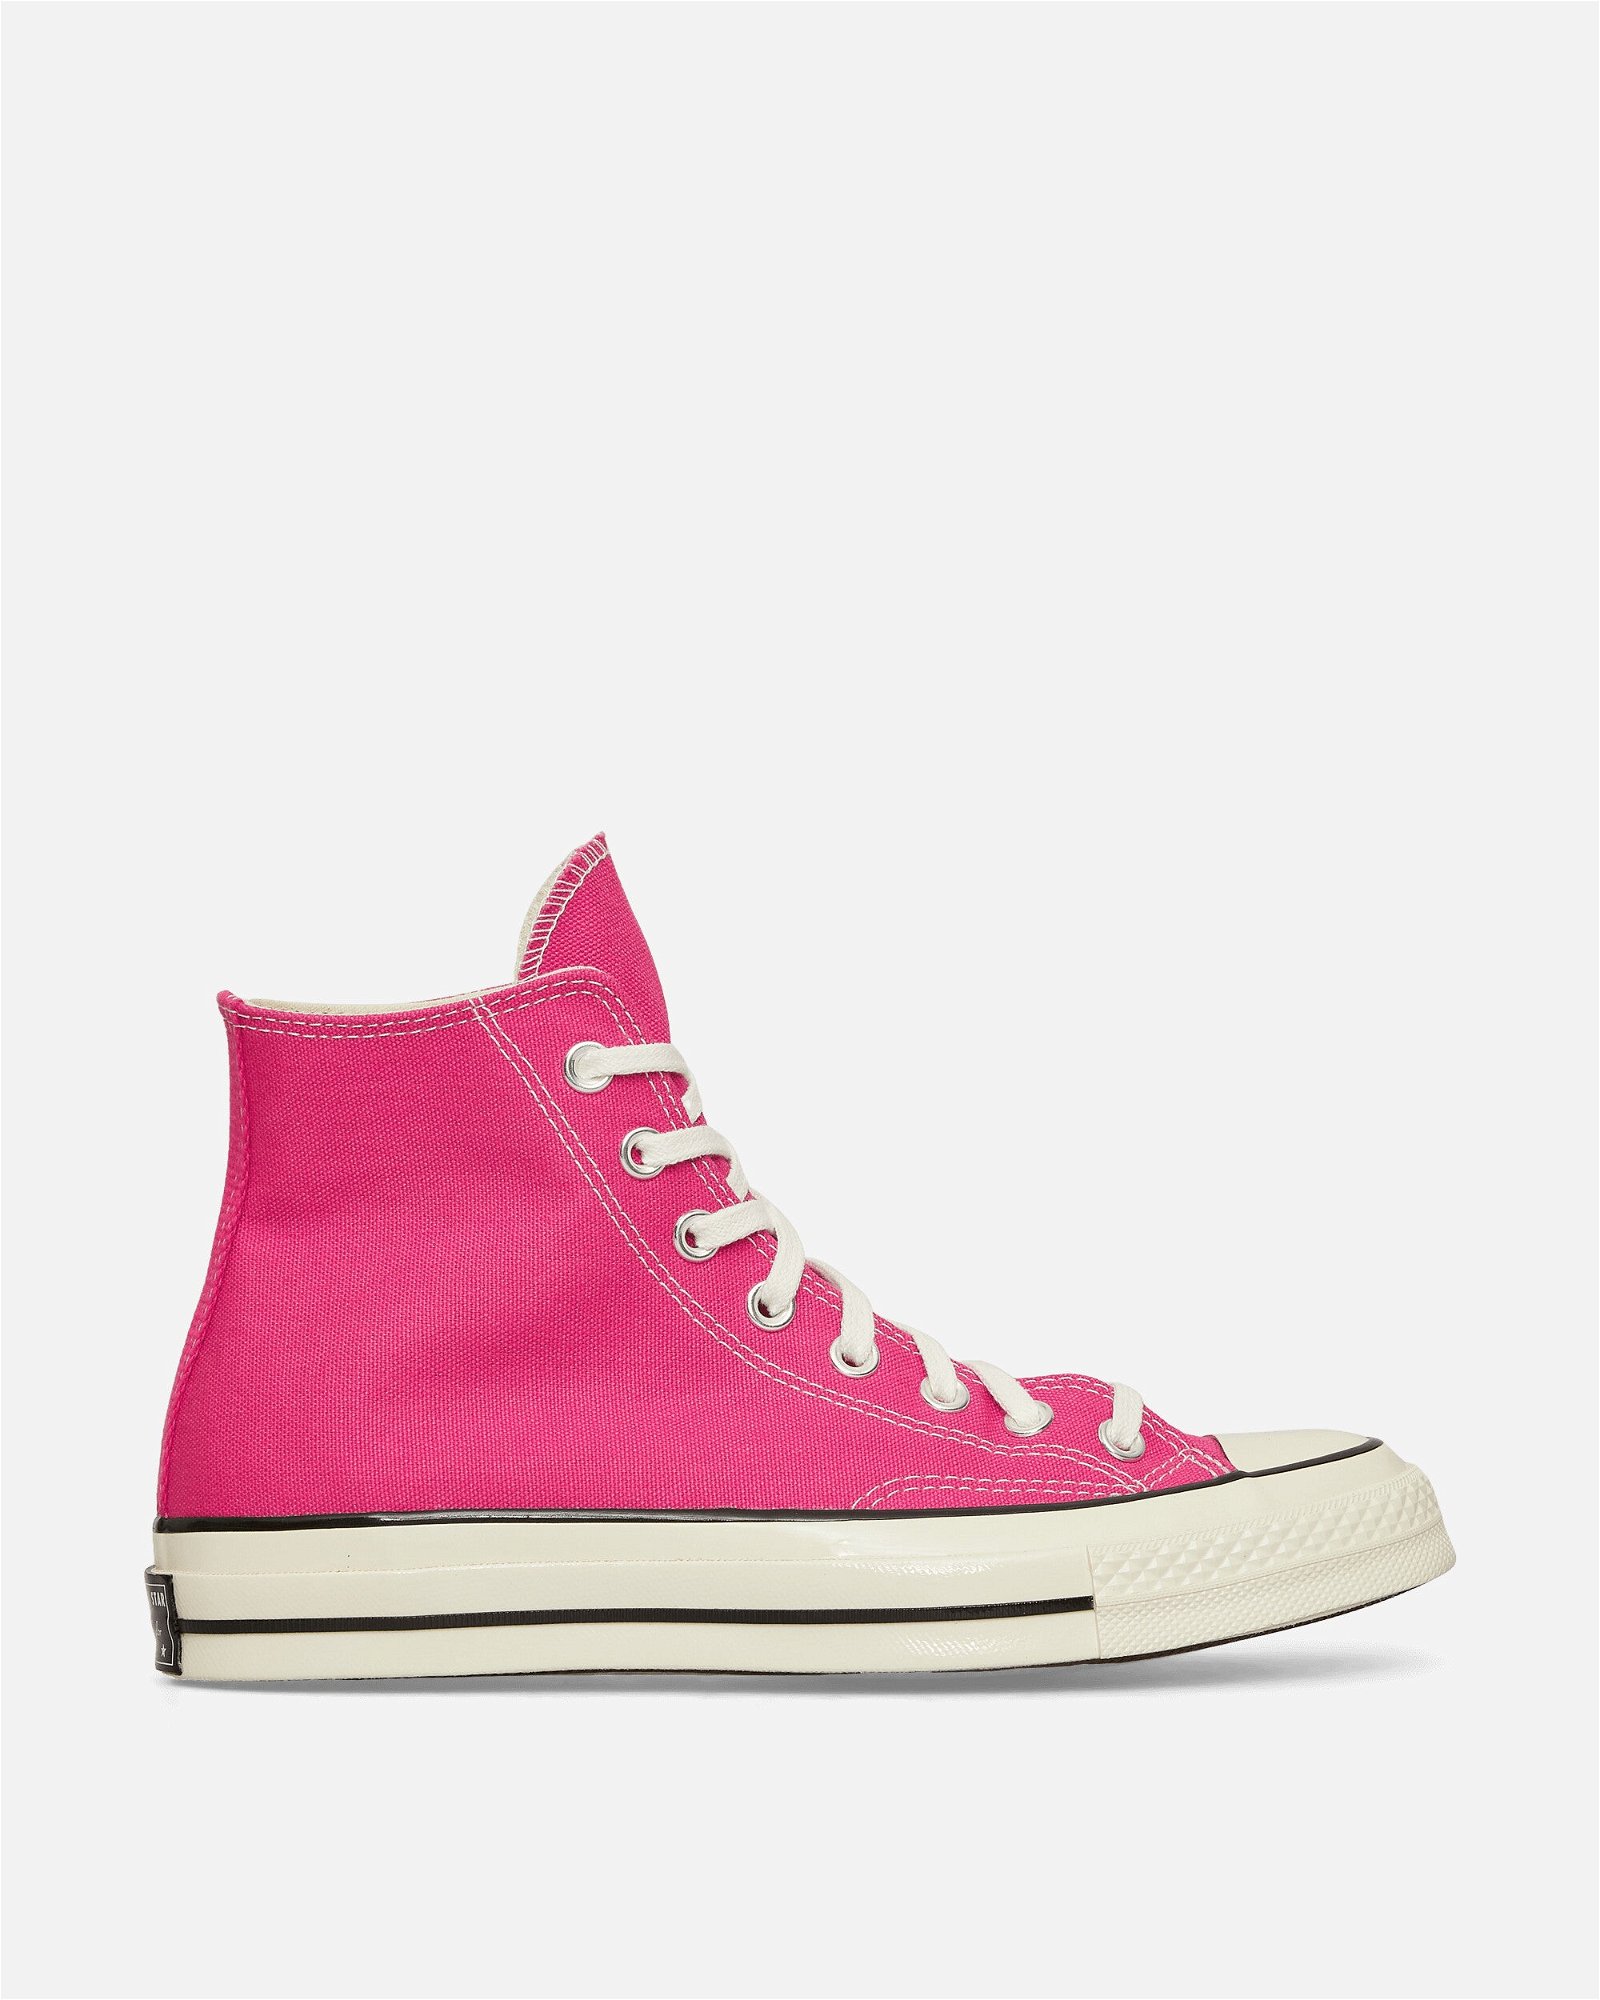 Chuck 70 Hi Sneakers "Lucky Pink"